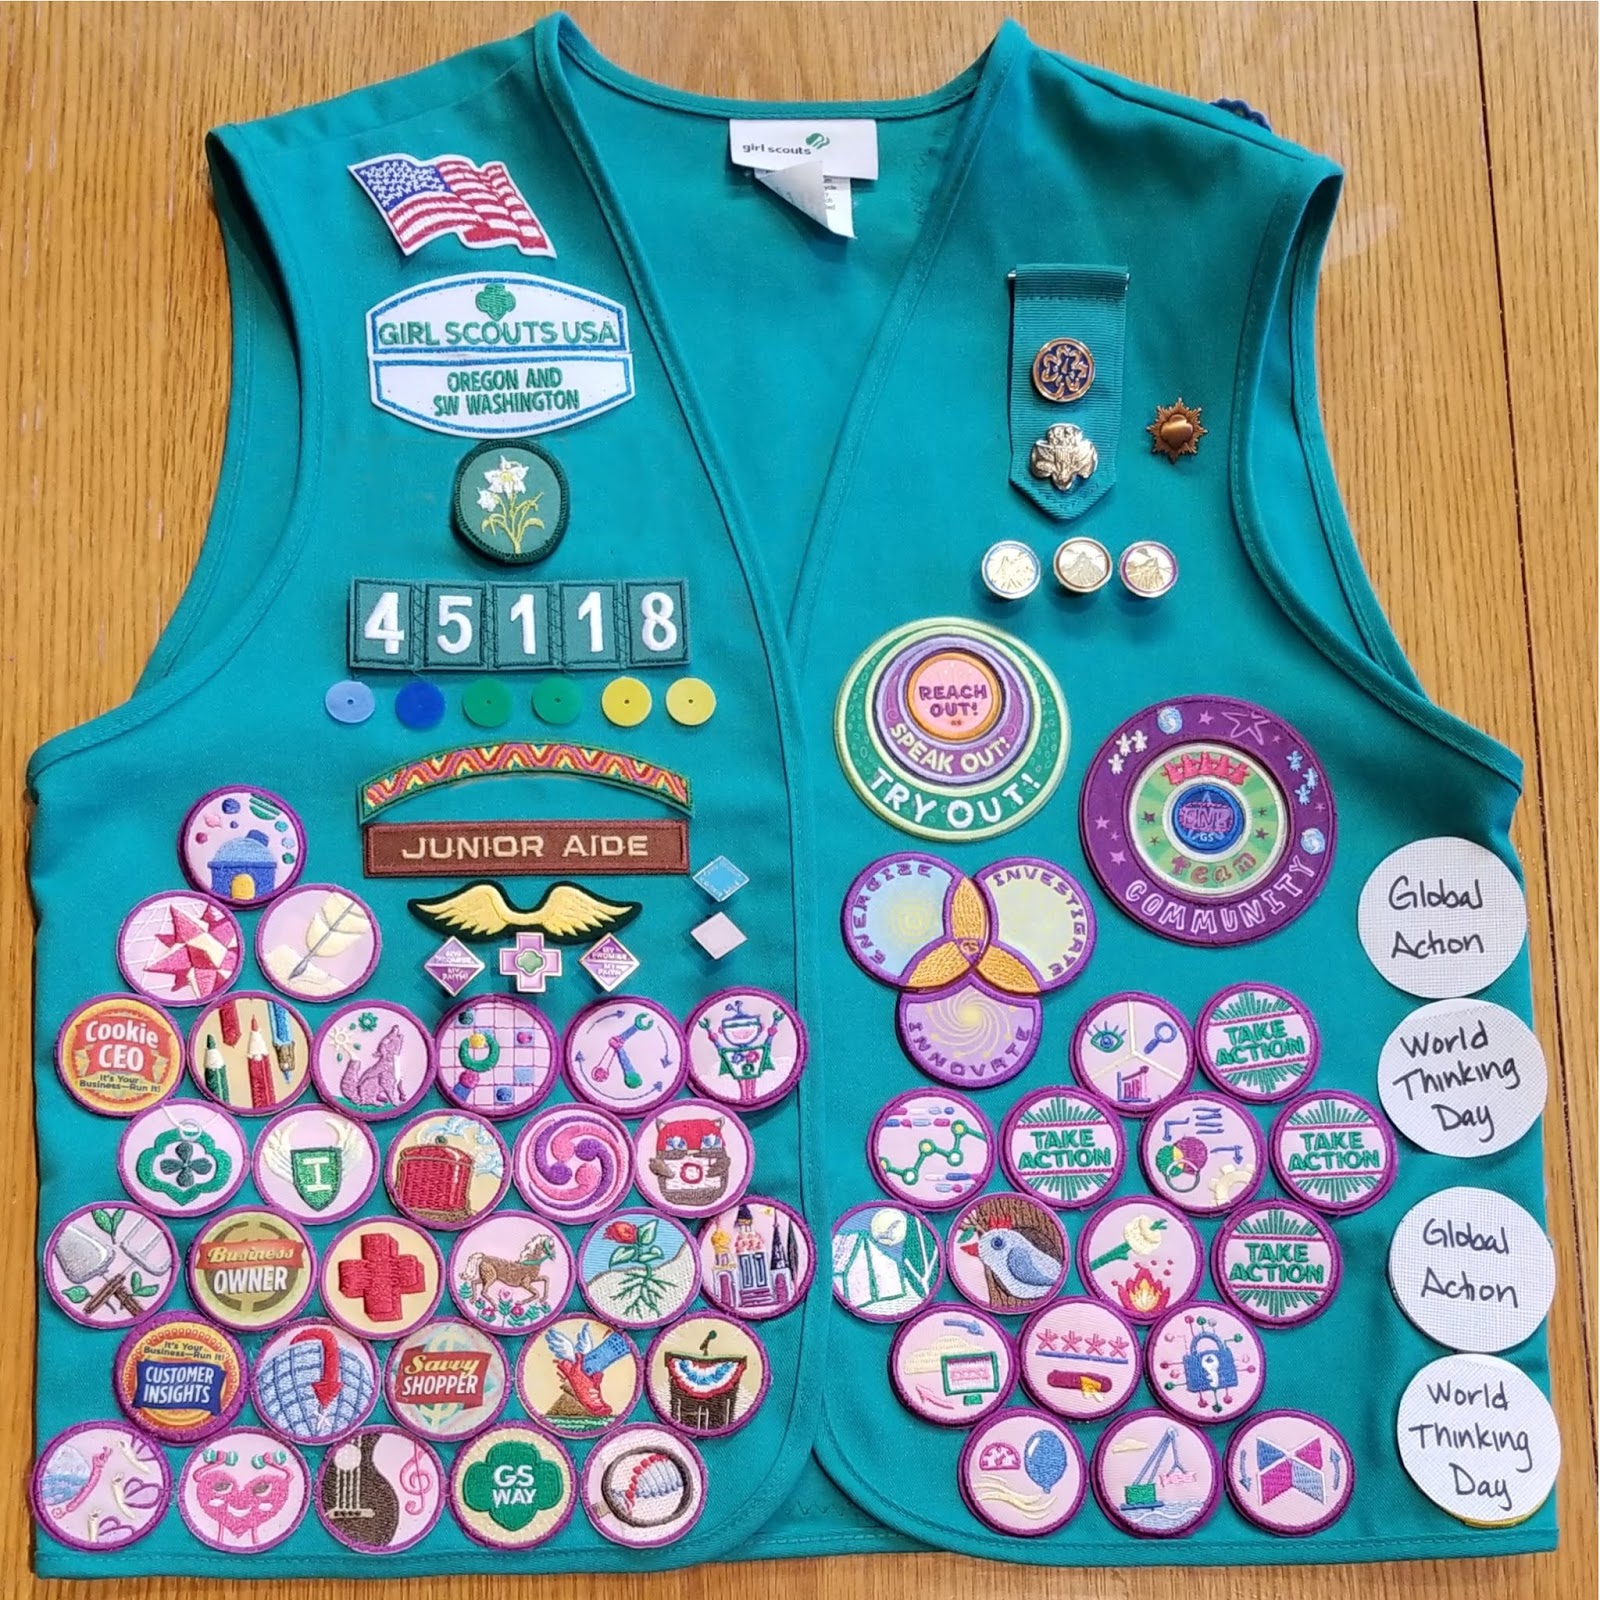 Applying Girl Scout or Boy Scout Badges with Cricut Easy Press 2